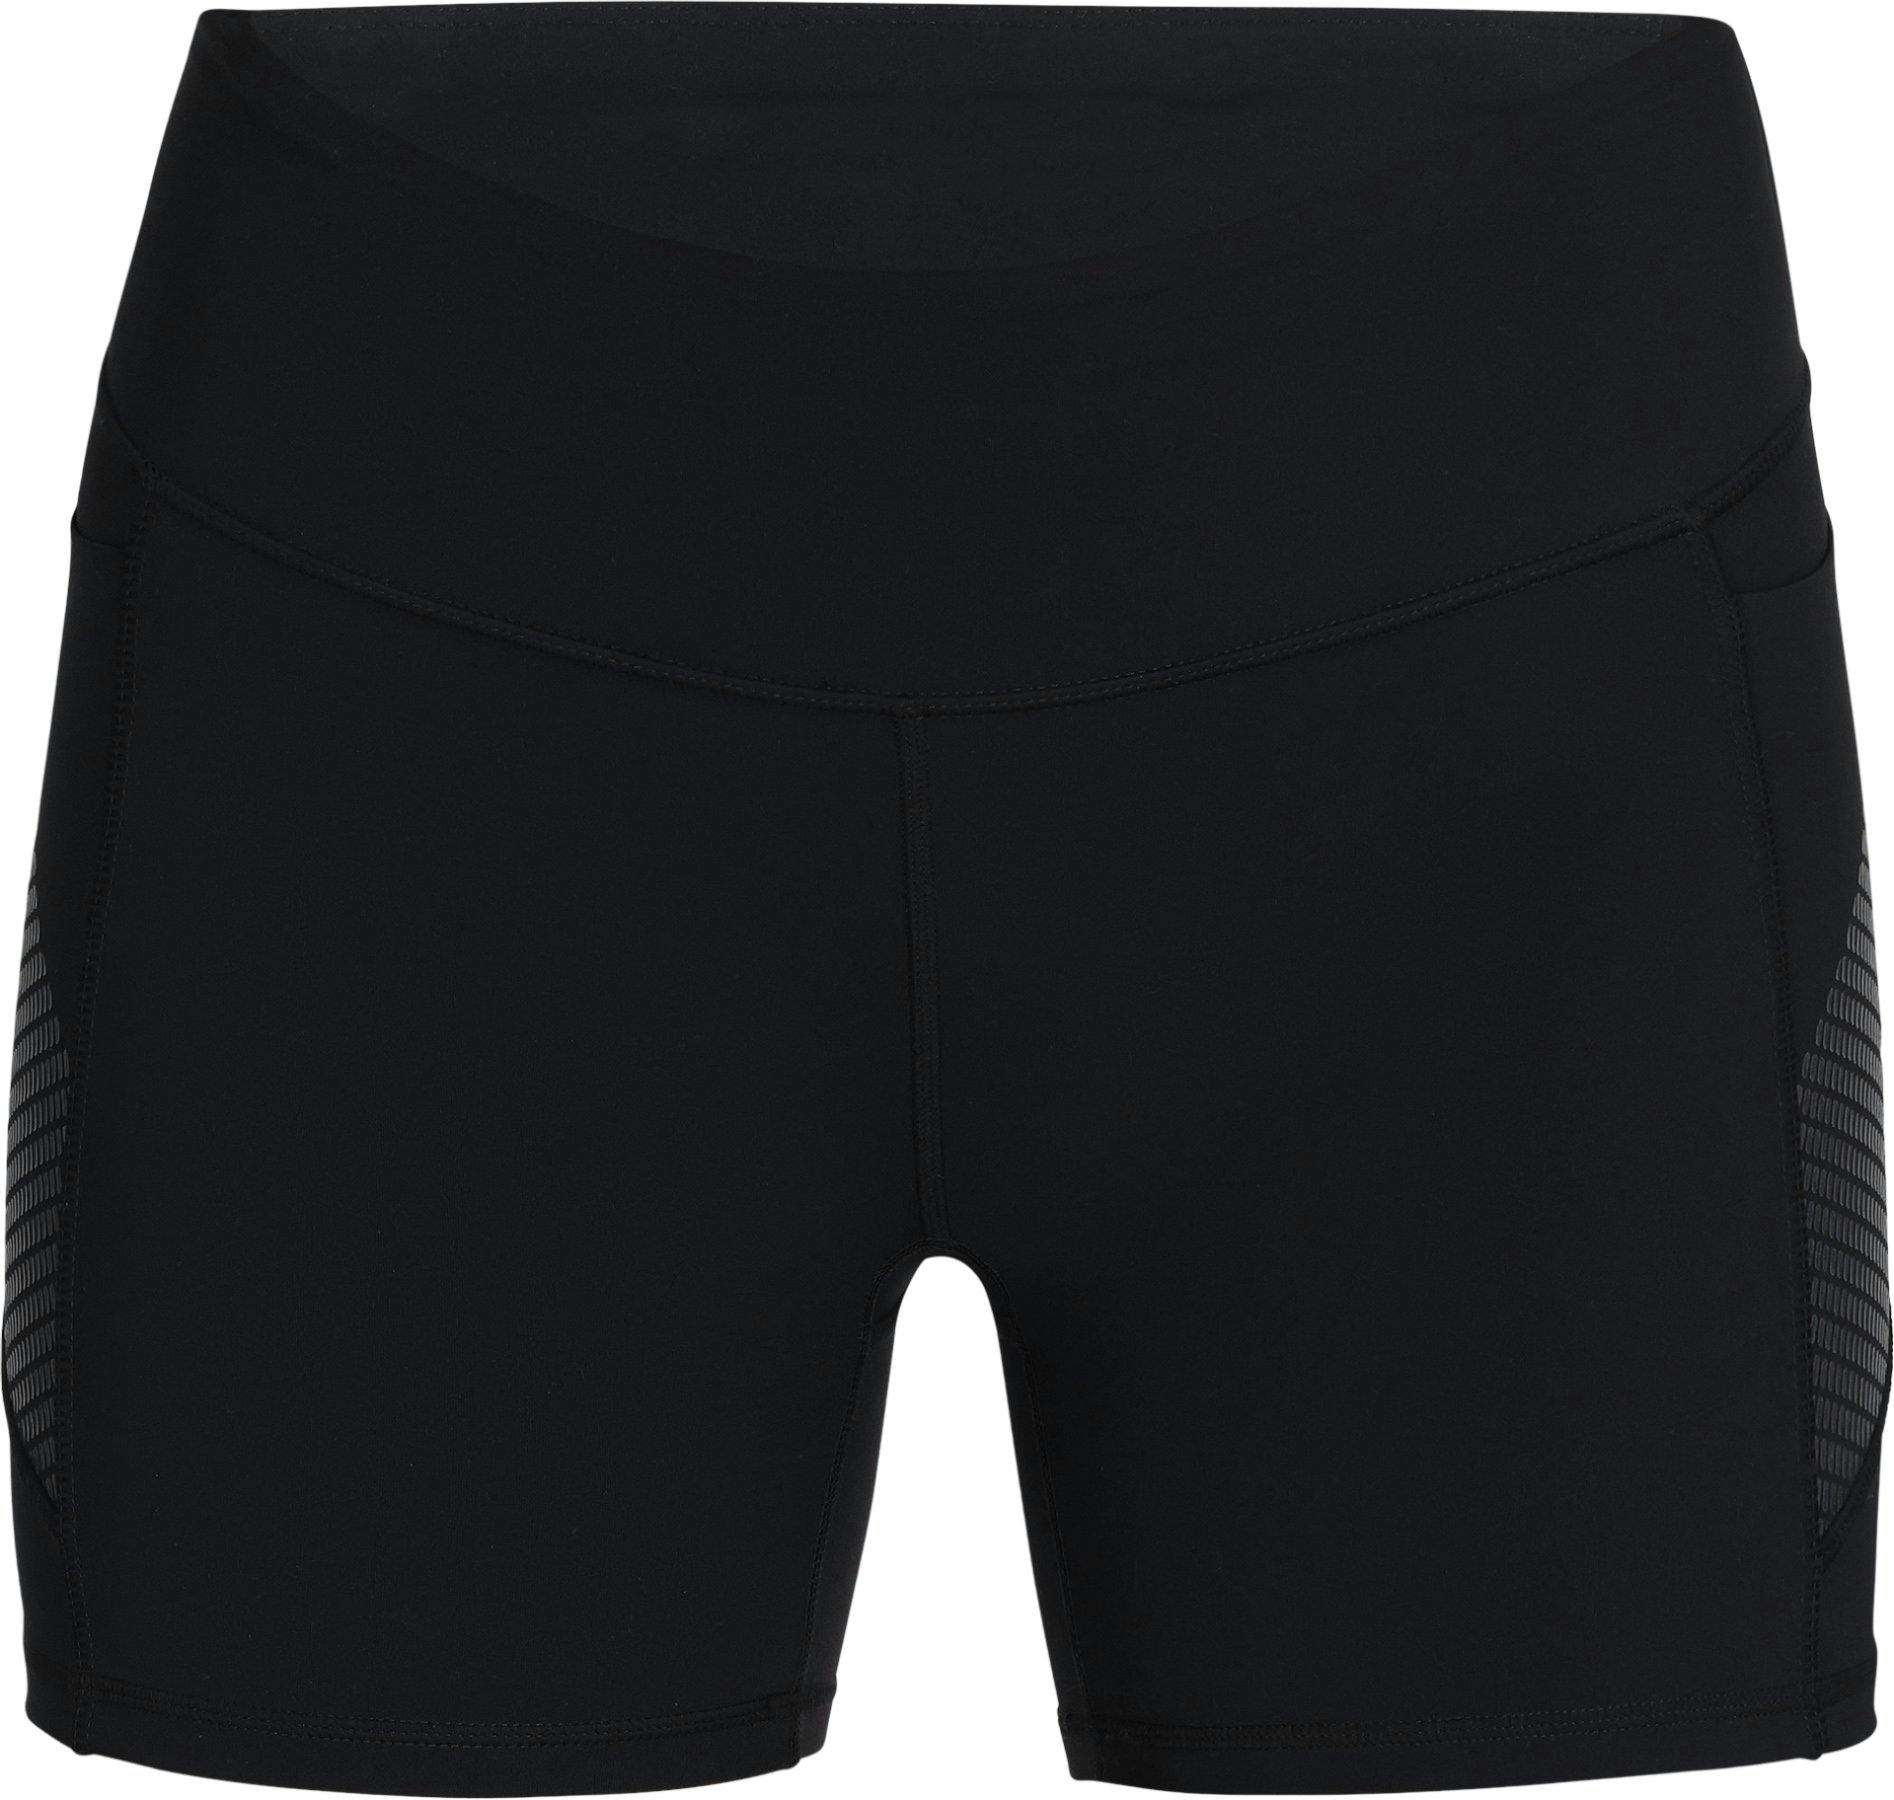 Product image for Ad-Vantage 4 in. Shorts - Women's